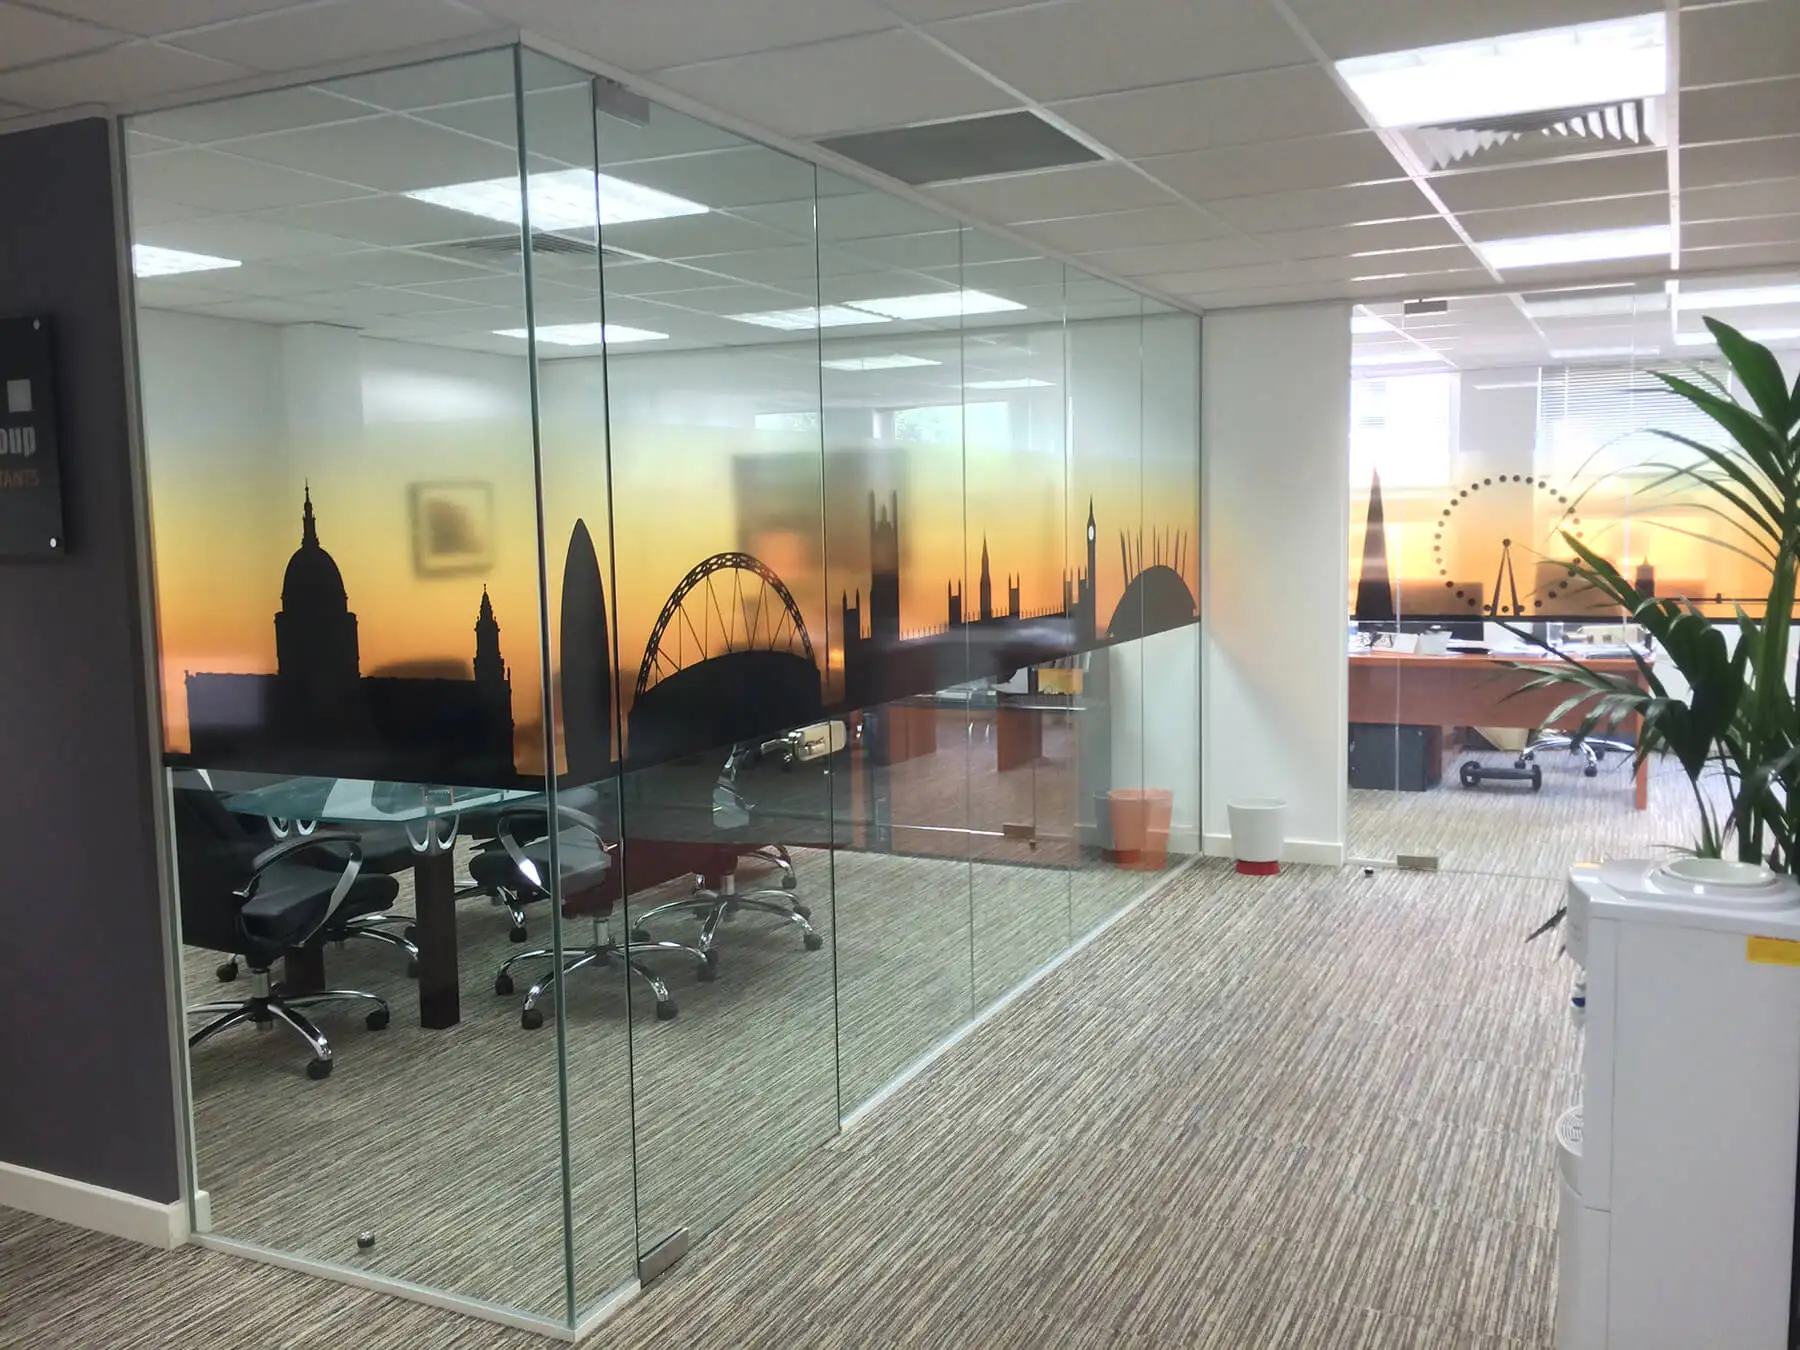 Large office space divided with desinger glass parttions and with flooring